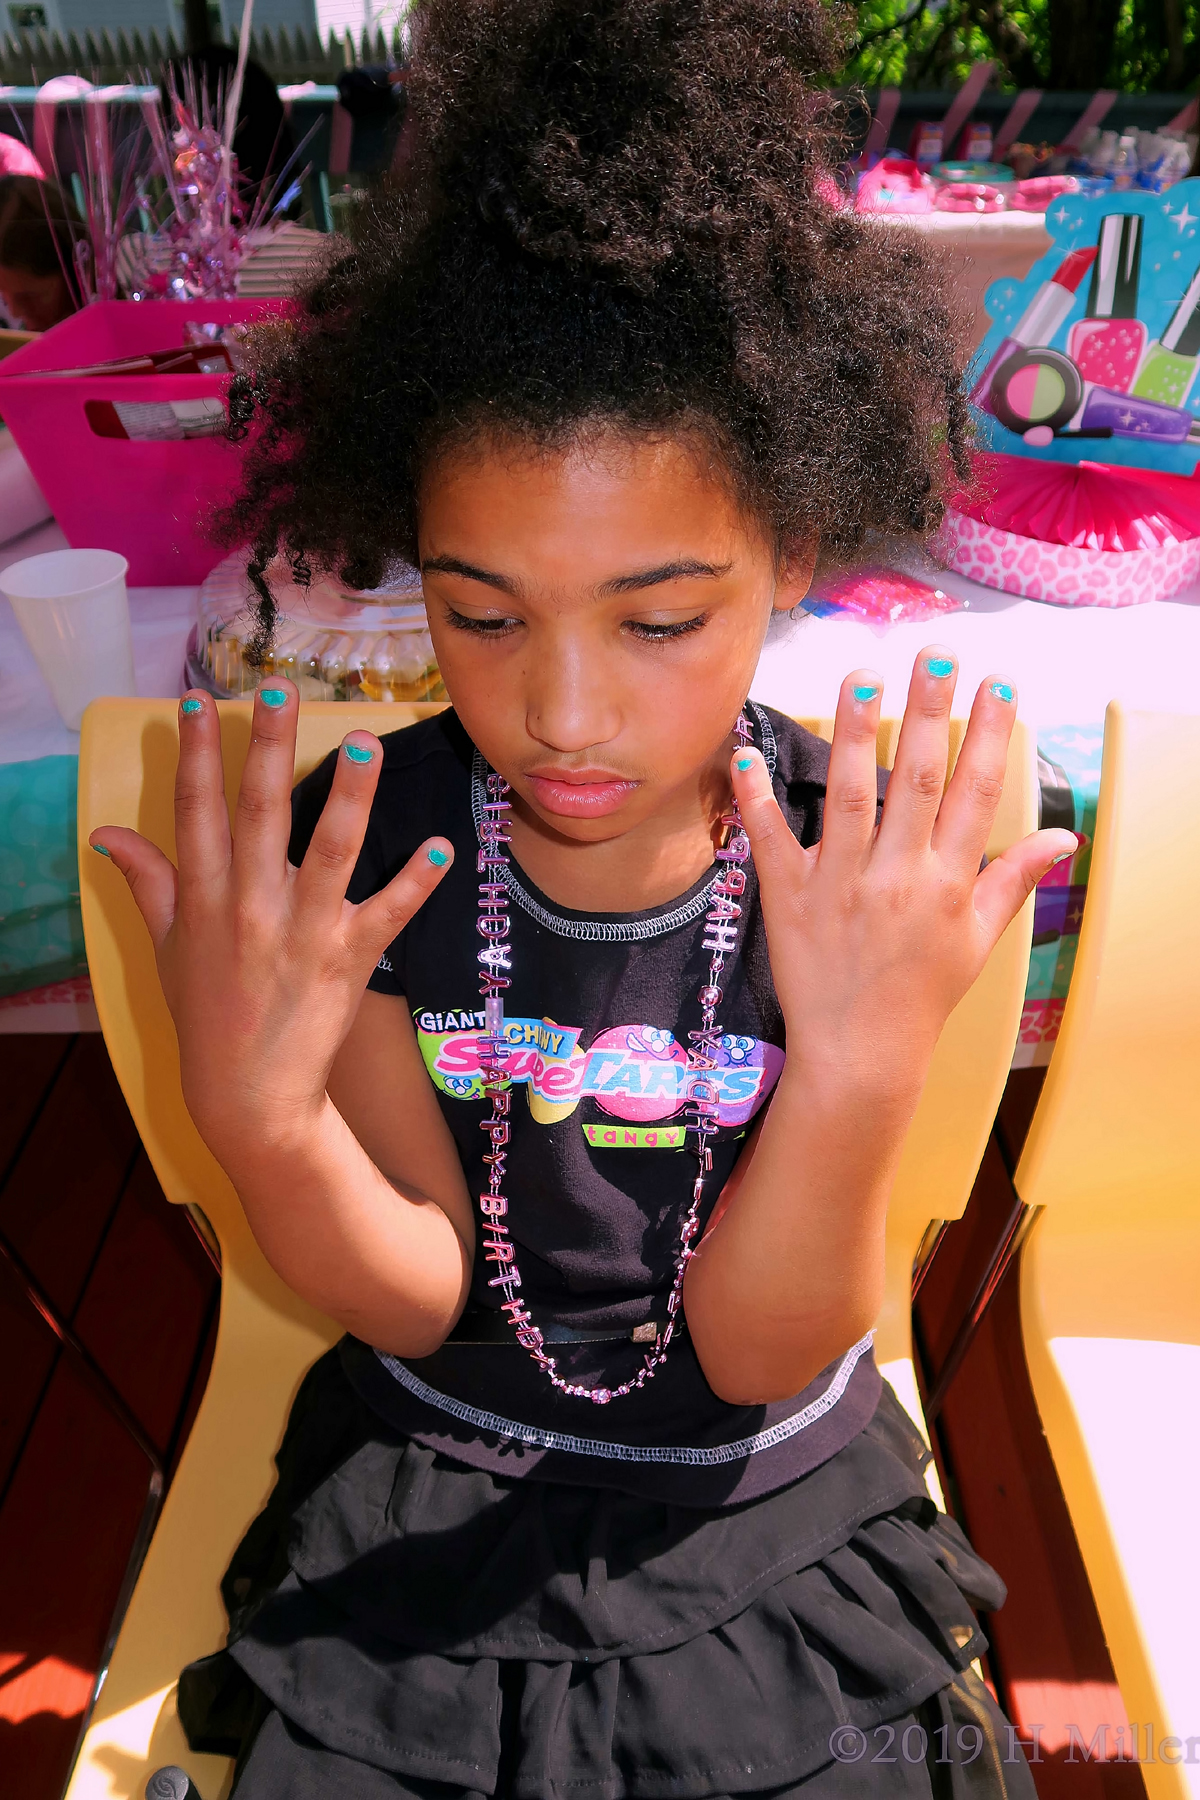 Look At Her Pretty Kids Manicure 